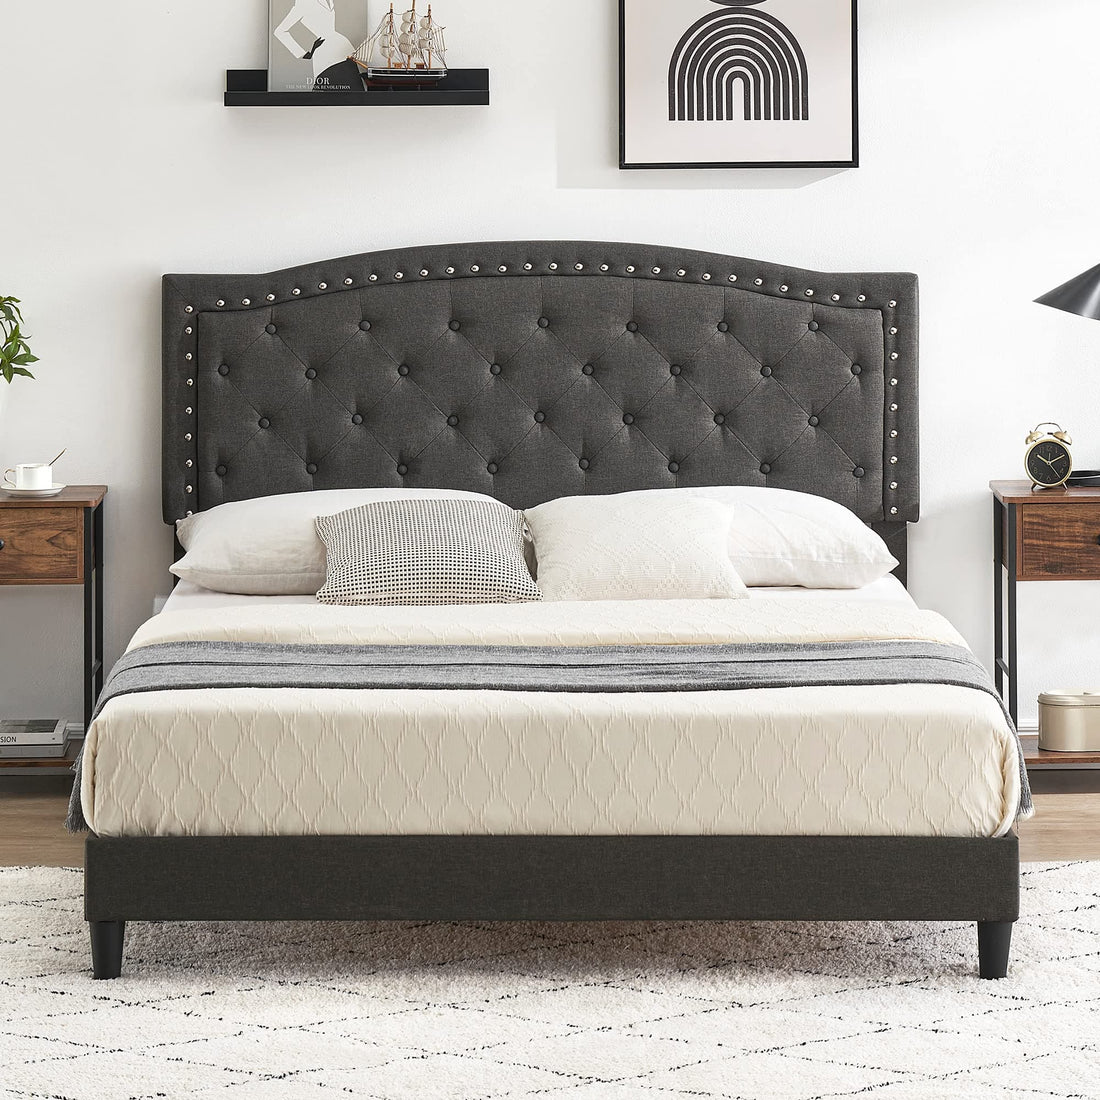 Full Size Bed Frame with Button Tufted Headboard, Fabric Upholstered Platform Bed Frame with Adjustable Headboard, Mattress Foundation, Easy Assembly, No Box Spring Needed